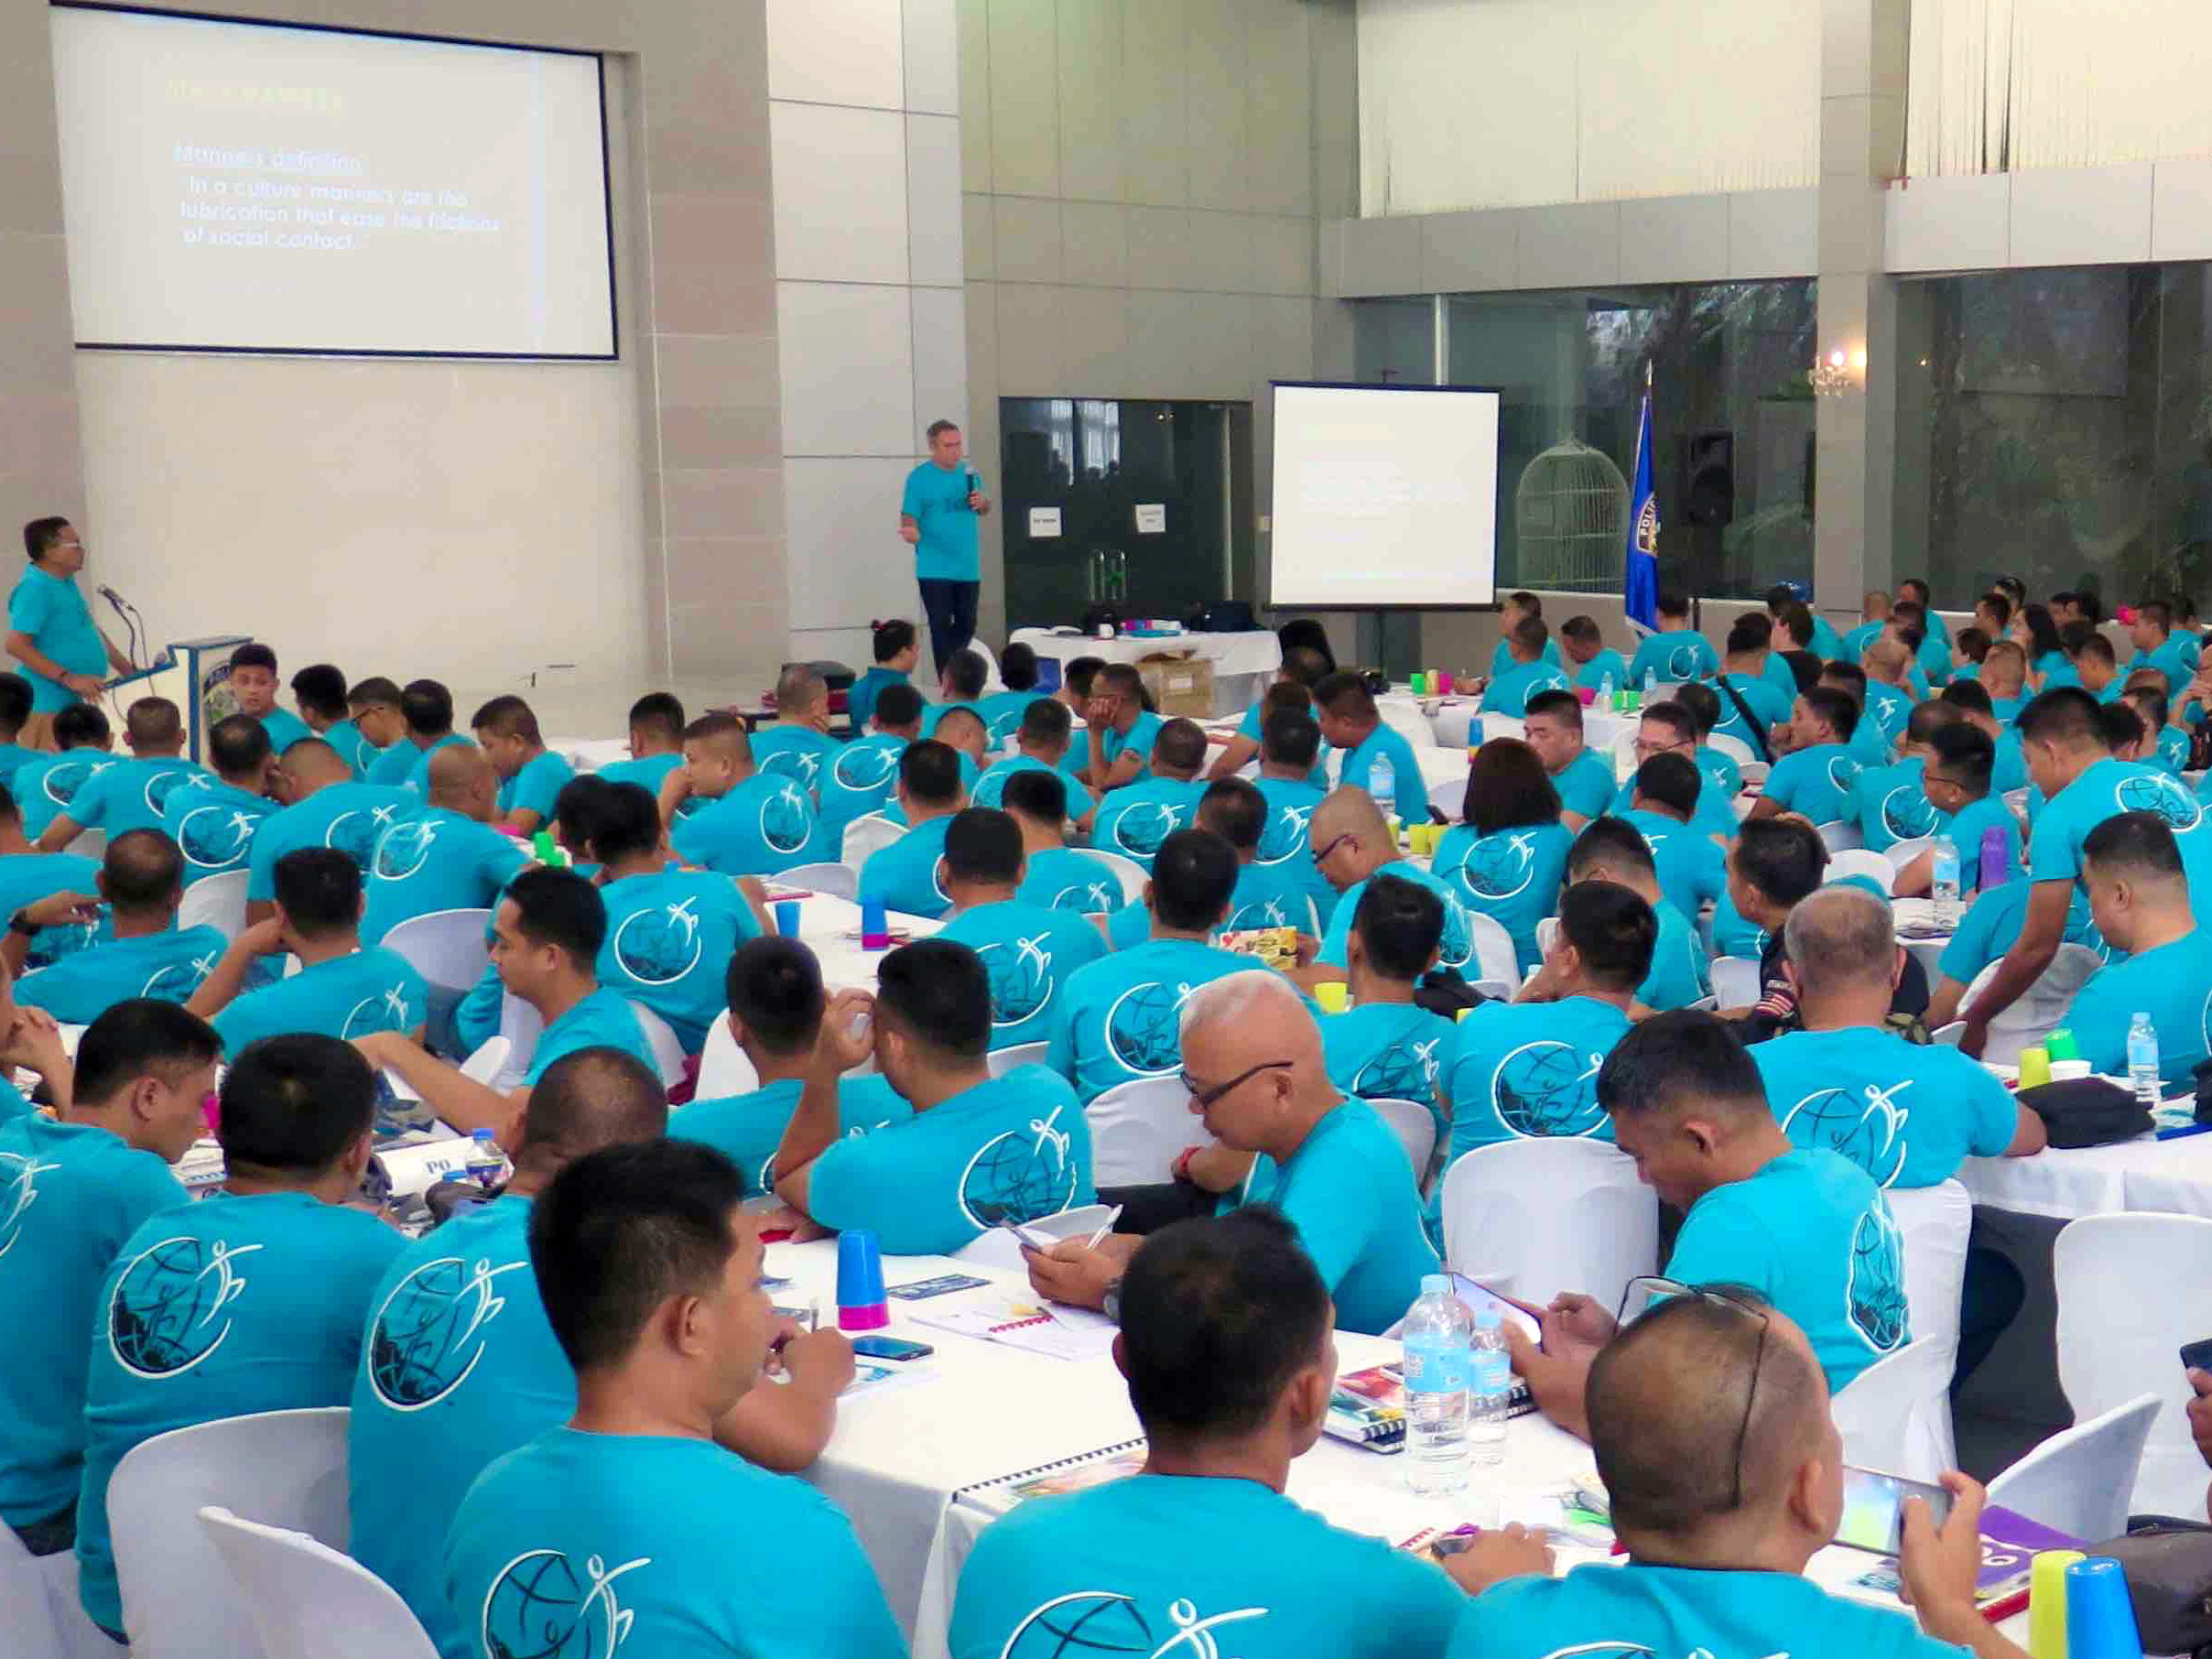 Foundation for a Drug-Free World trains officers from the Drug Enforcement Agency in the Philippines on the Truth About Drugs program.